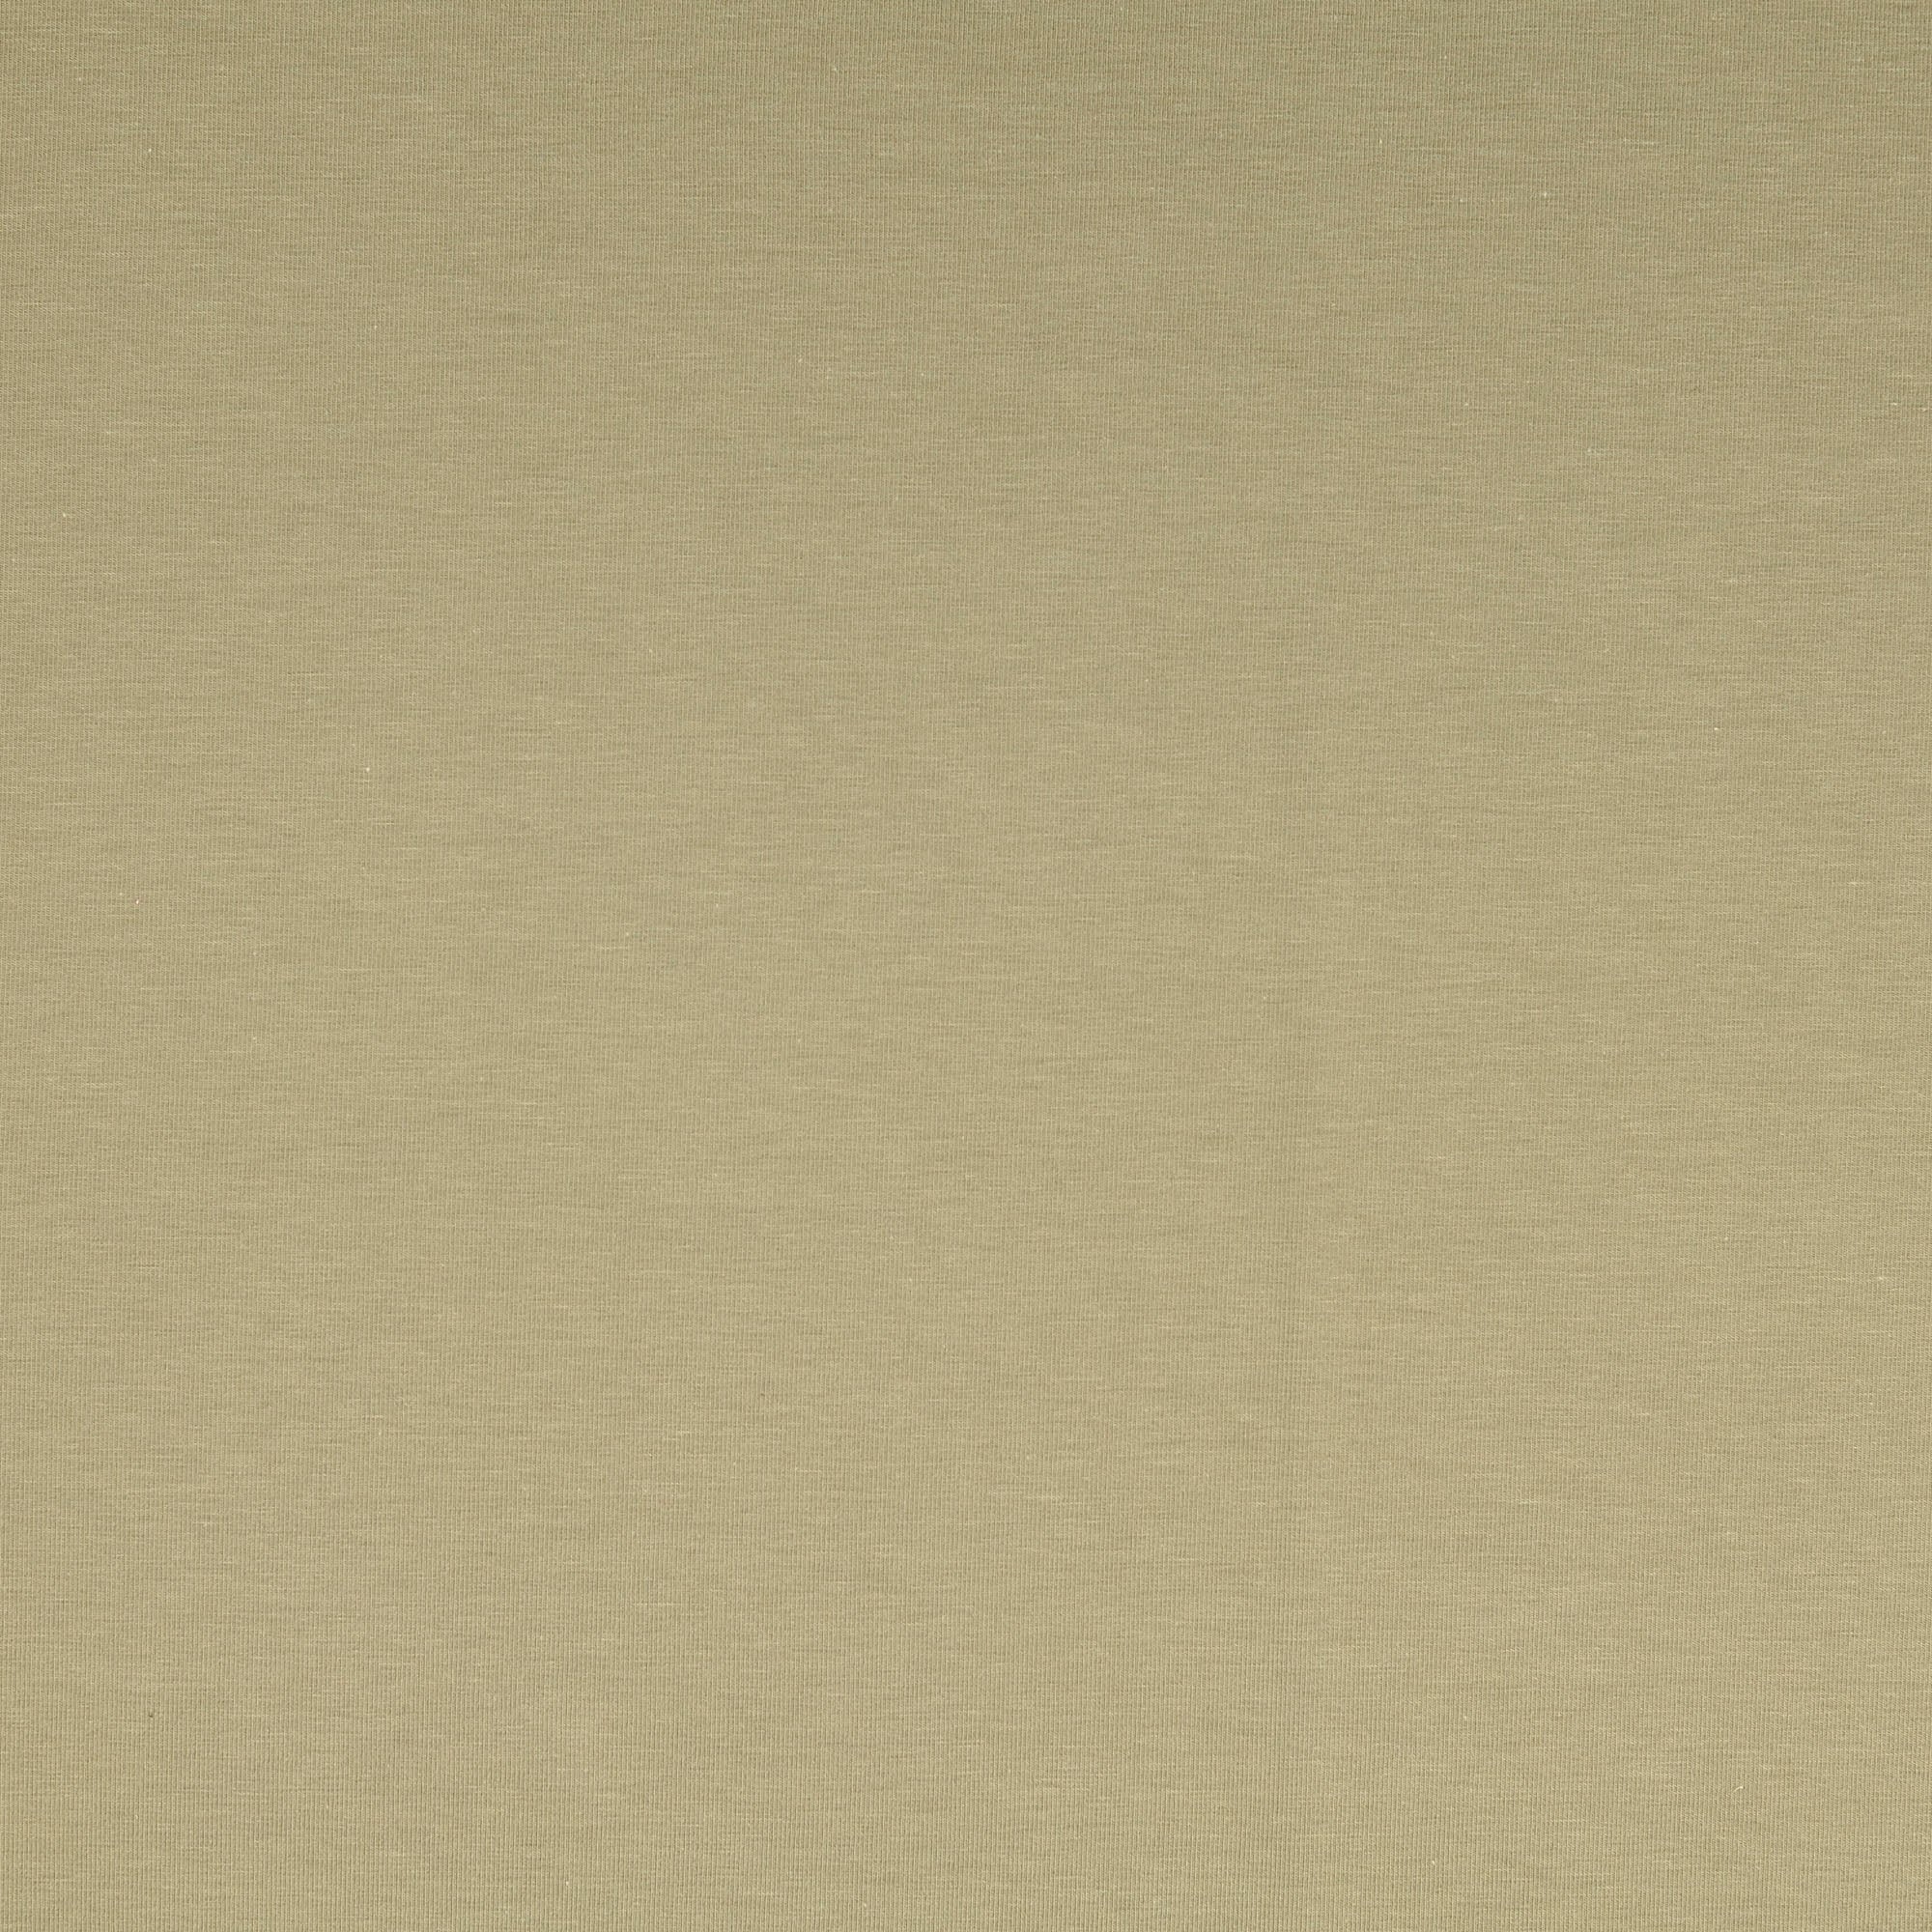 Eco Chic Olive Bamboo Cotton Jersey Fabric